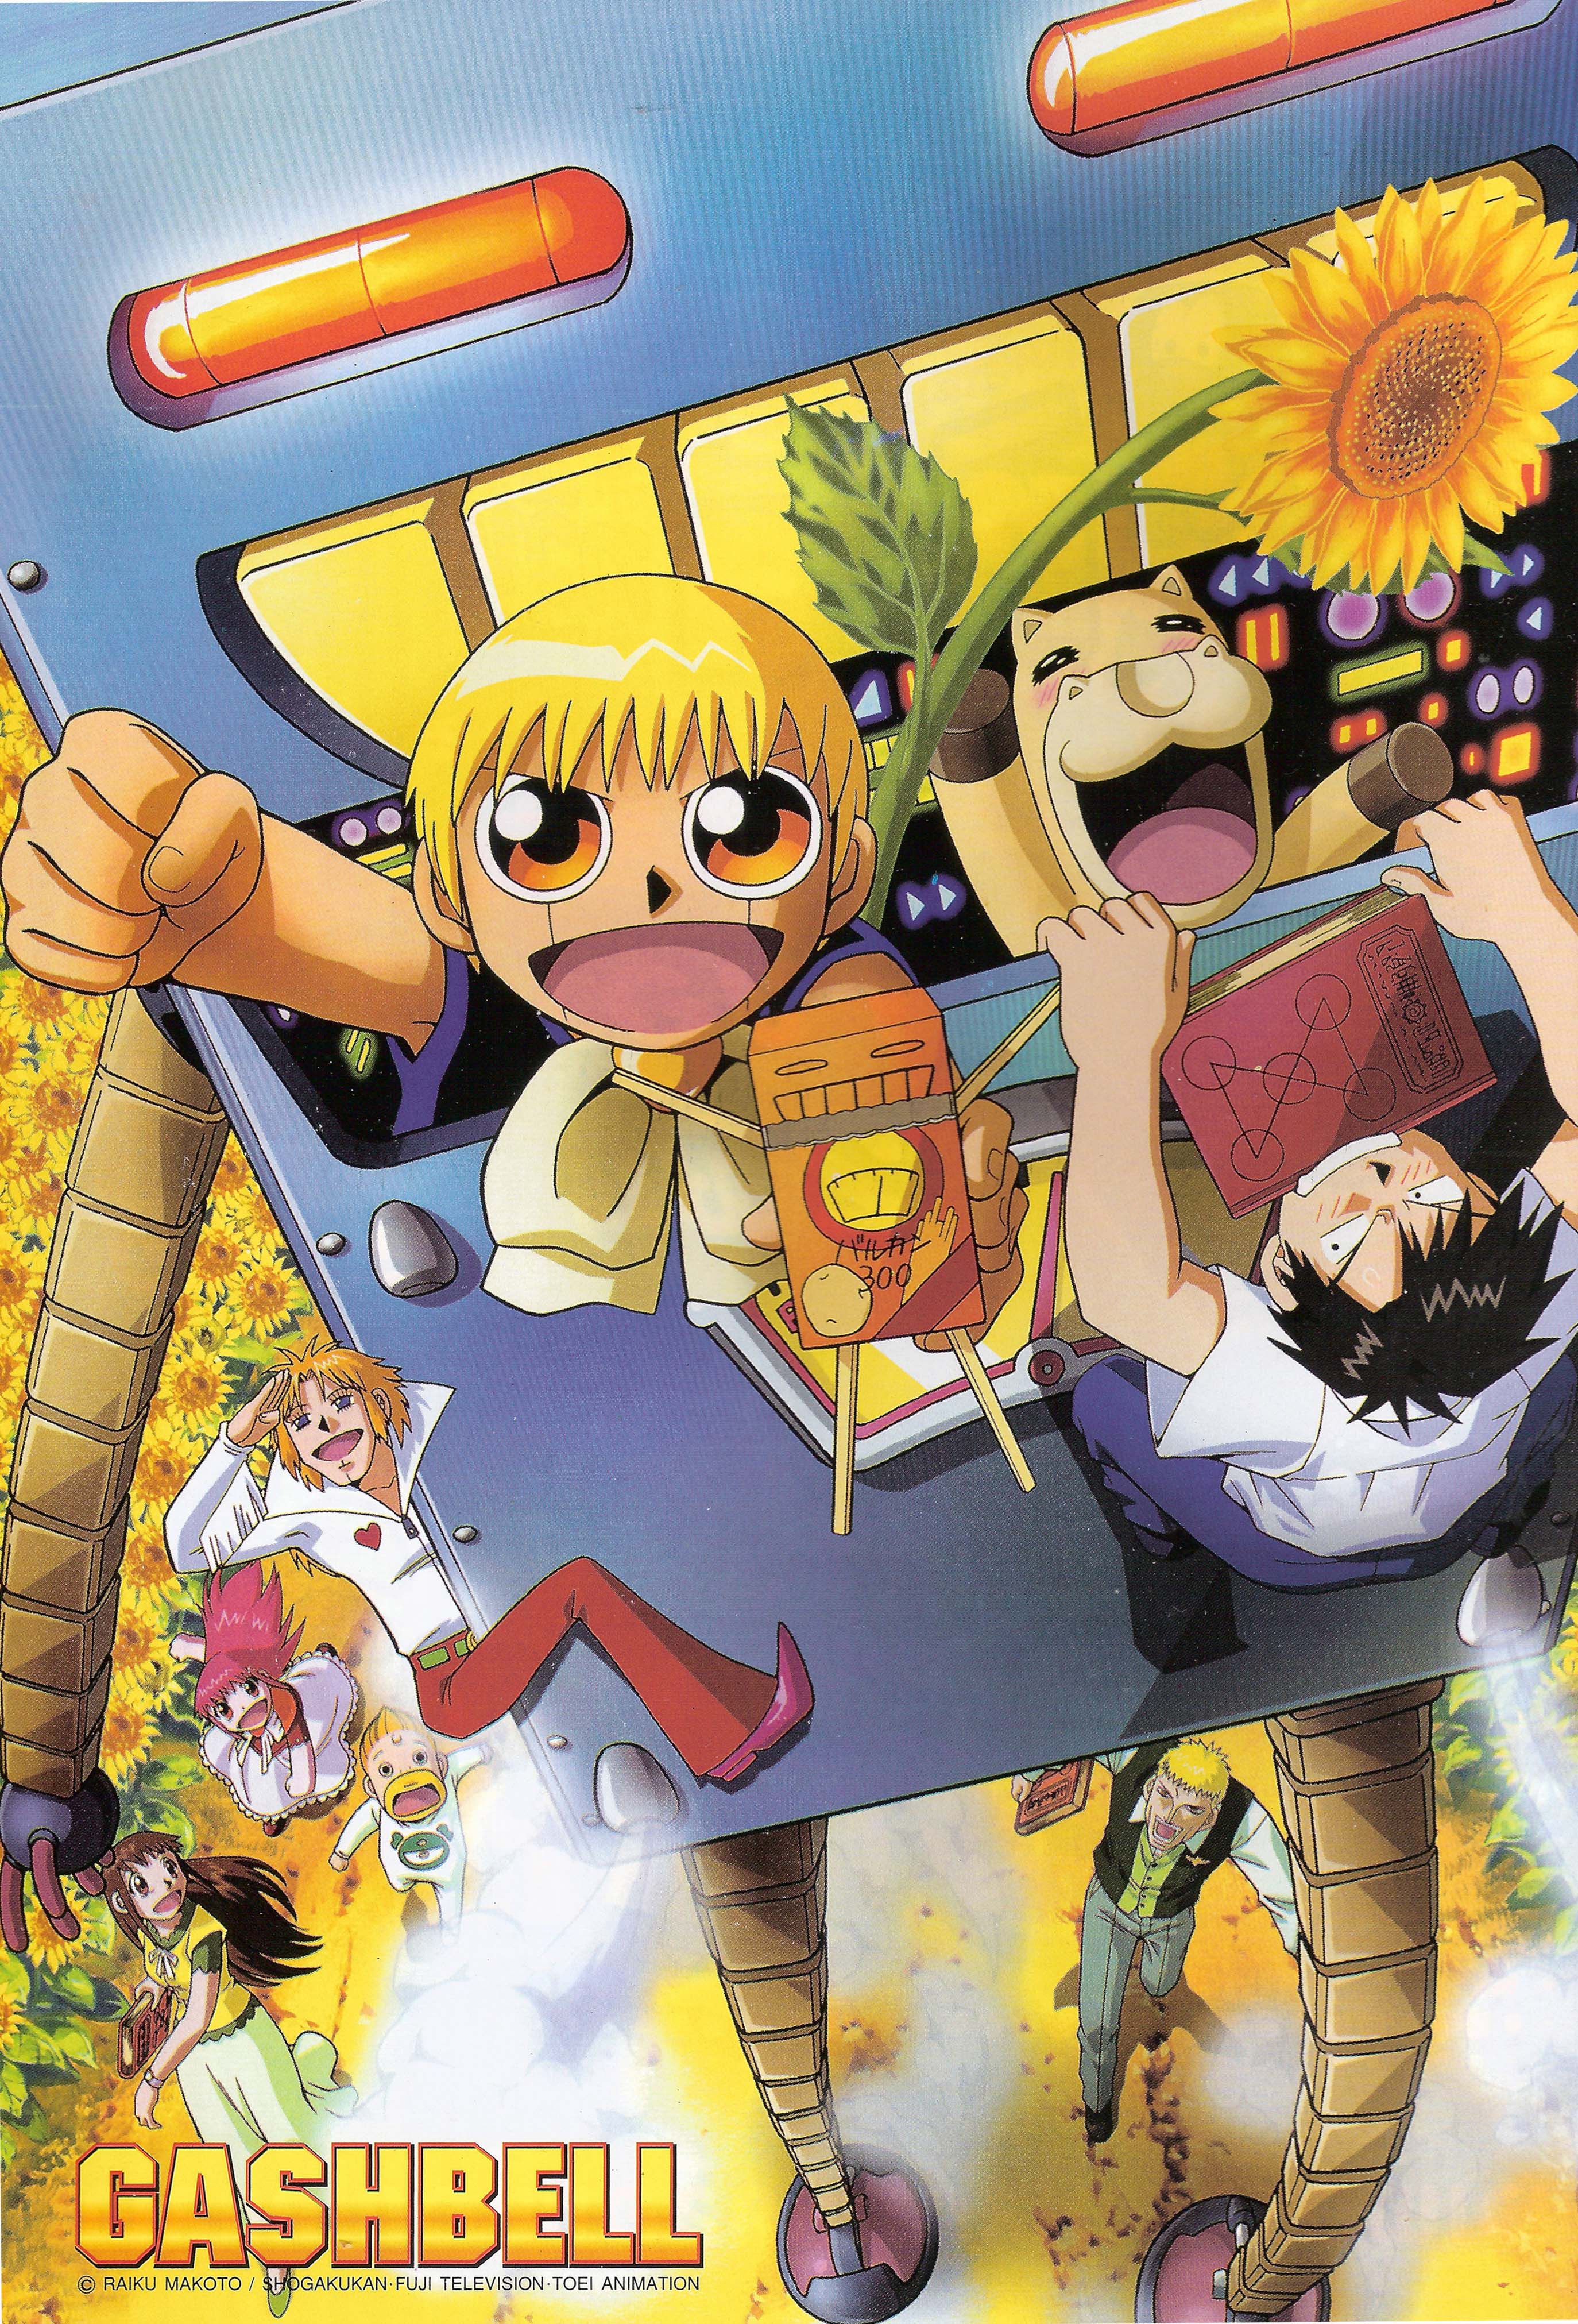 Konjiki no Gash Bell and Scan Gallery